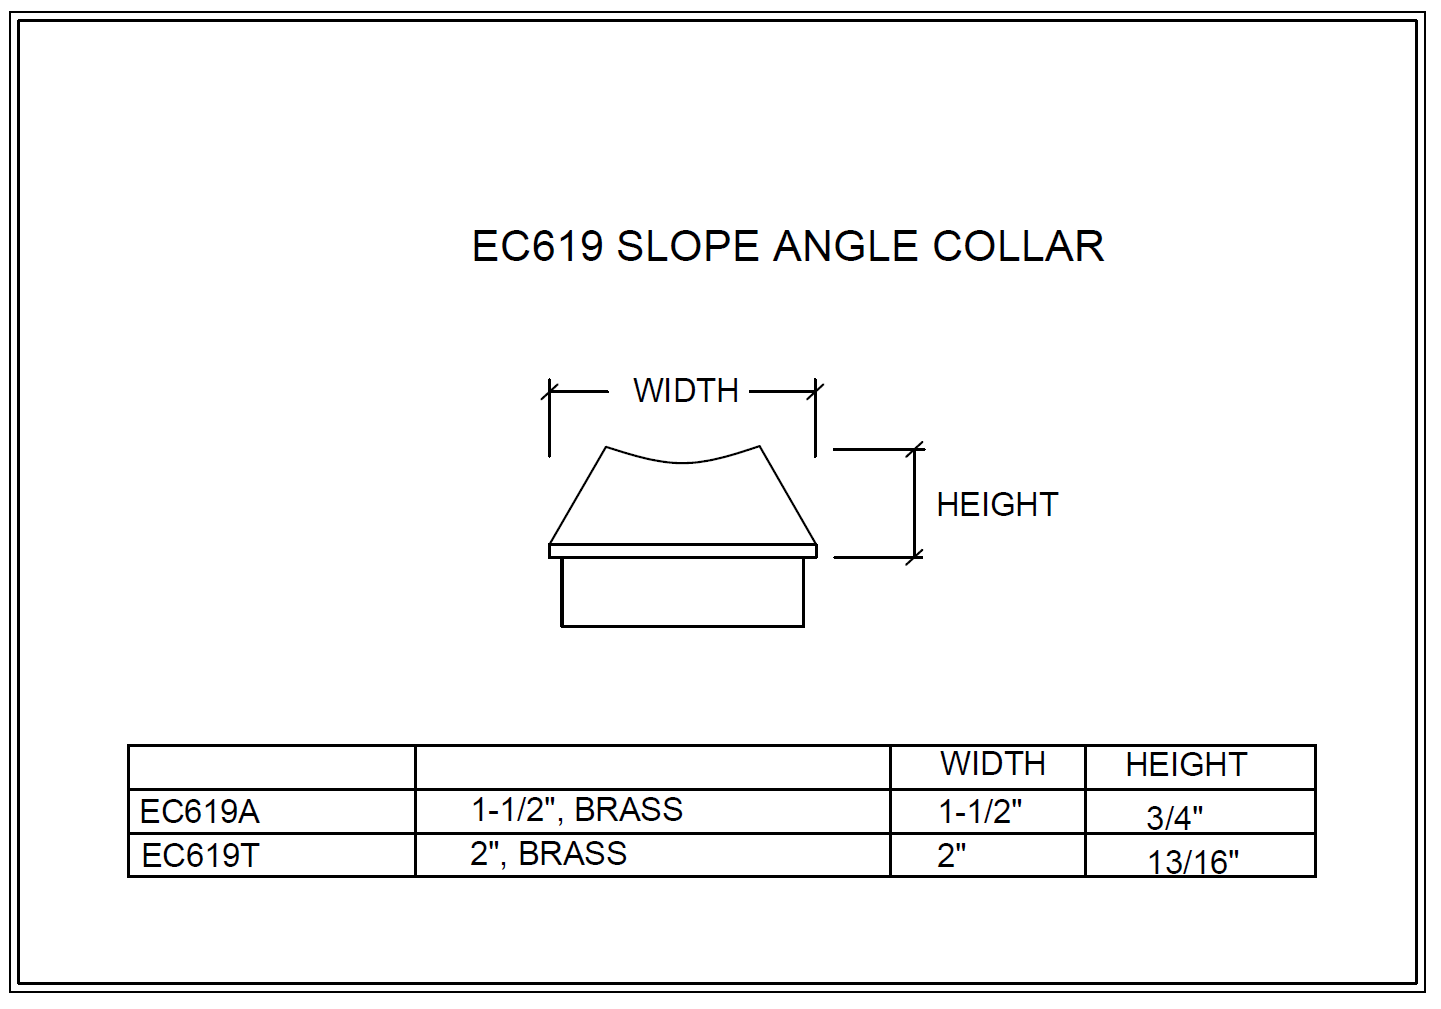 Slope Angle Collar 1.5" - All finishes